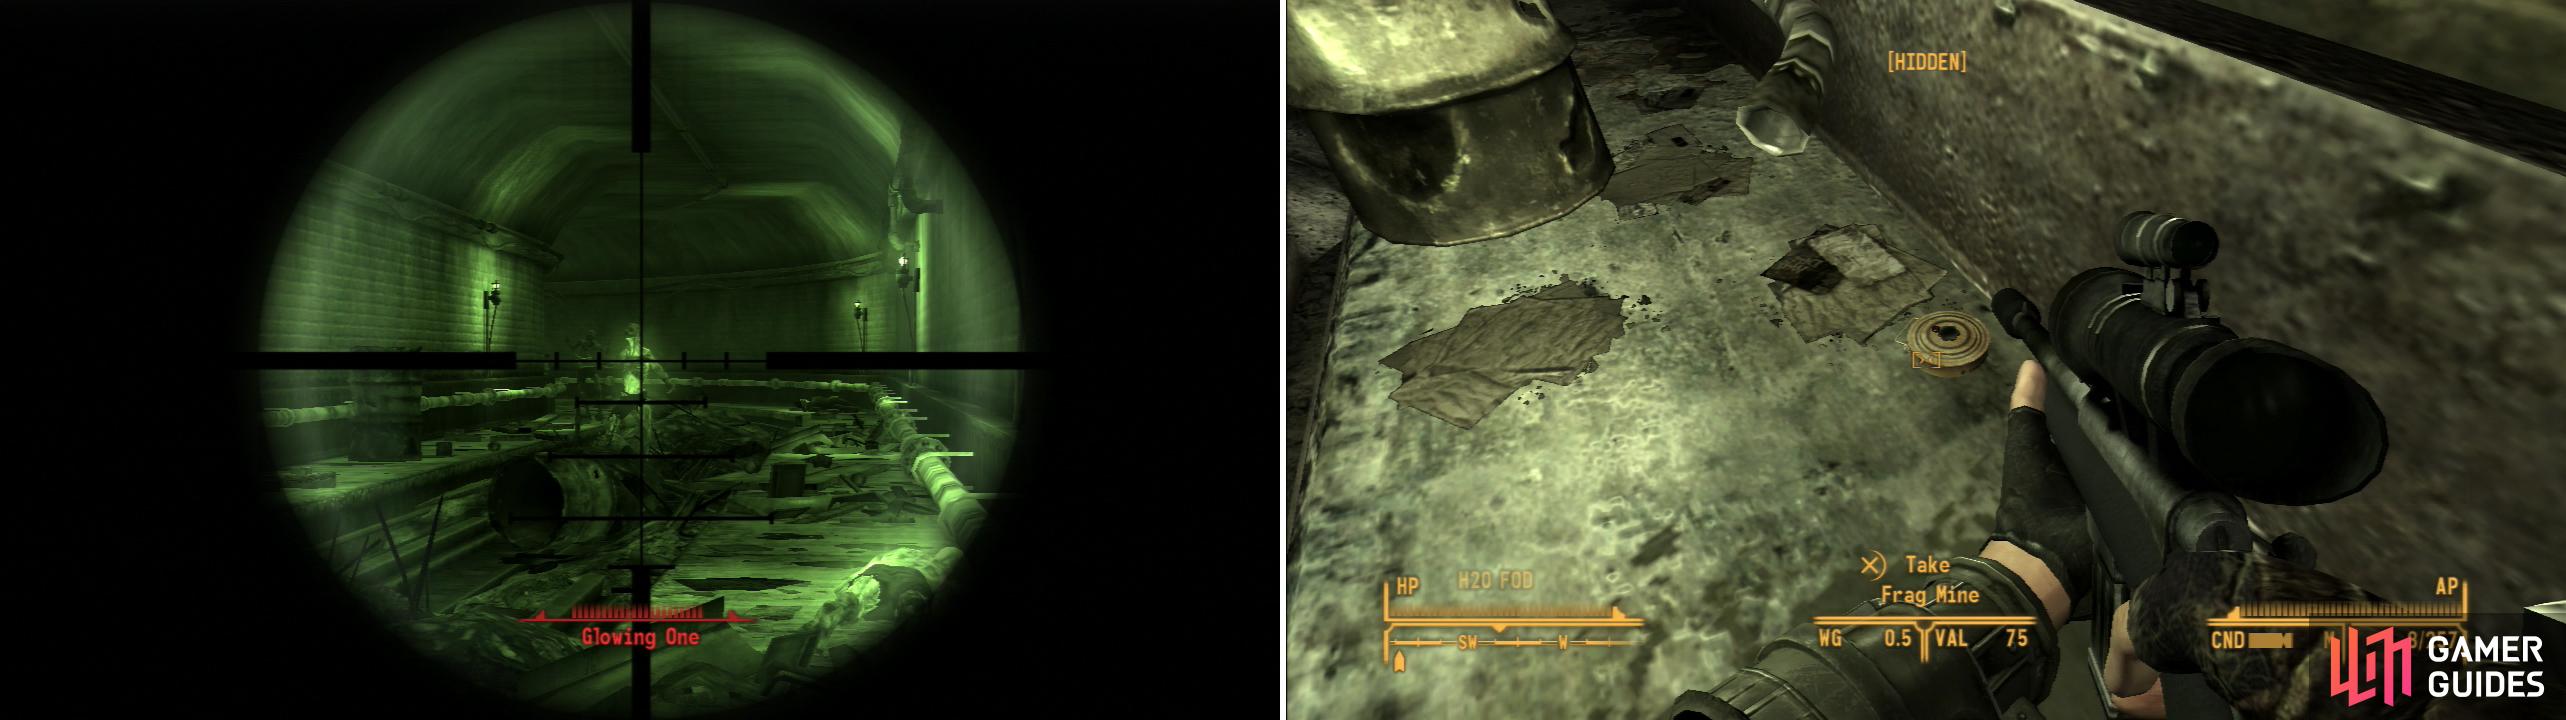 In the train tunne leading to Nellis you’ll encounter two threats; Ghouls (left) and traps (right).